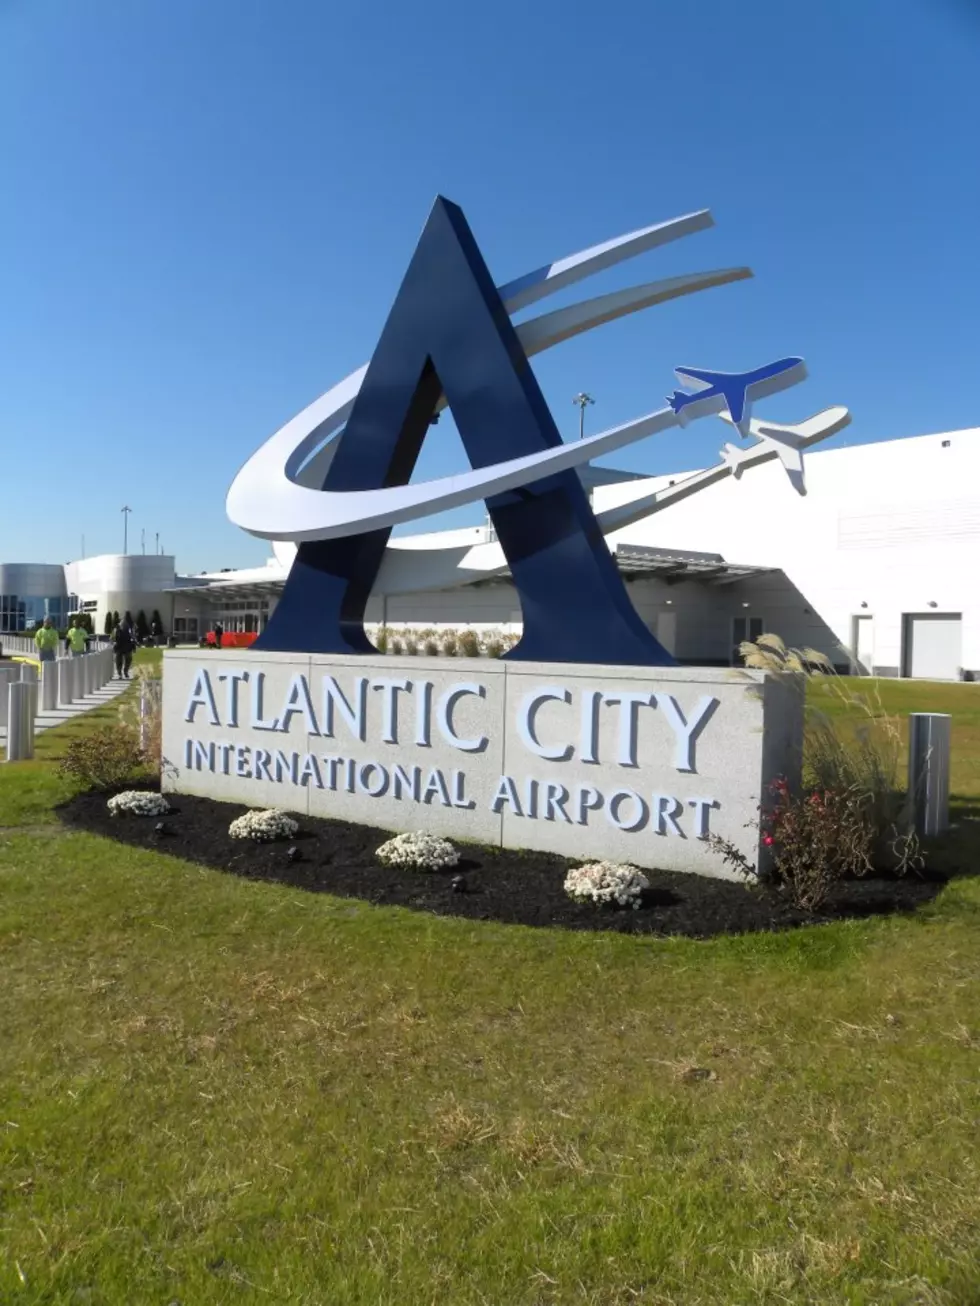 Big Changes Coming to Atlantic City International Airport